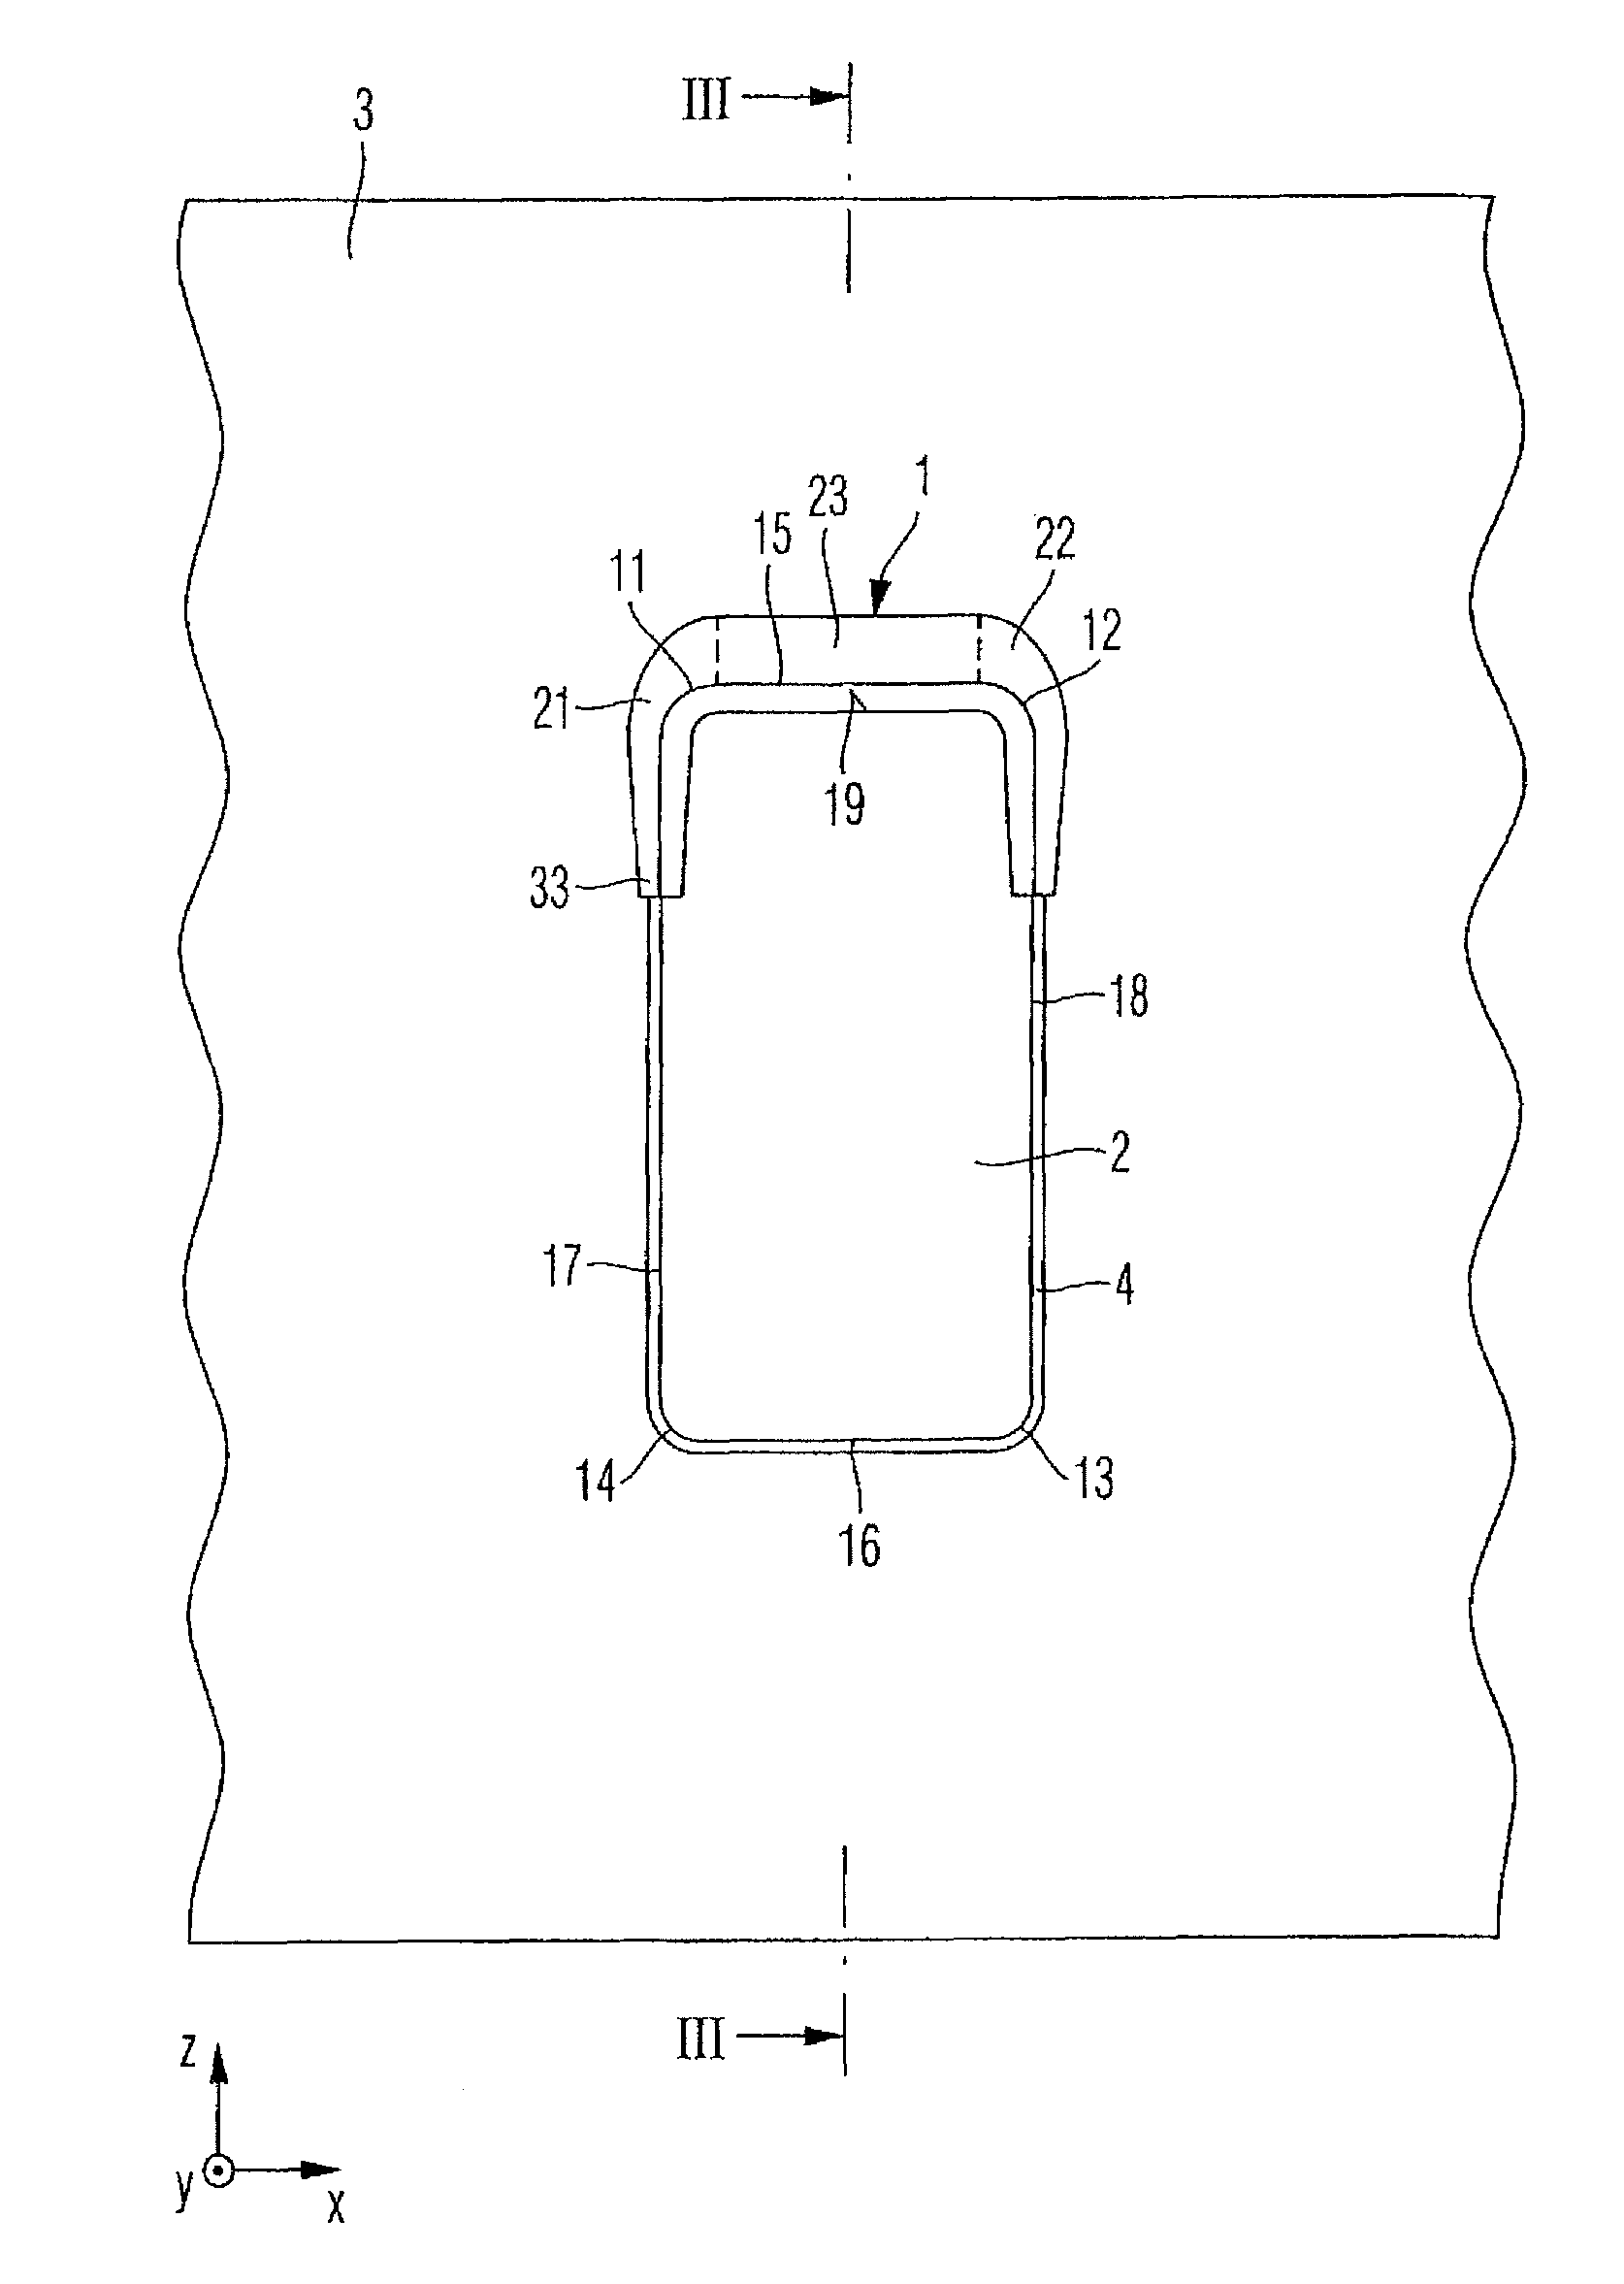 Cover plate, door covering and aircraft or spacecraft